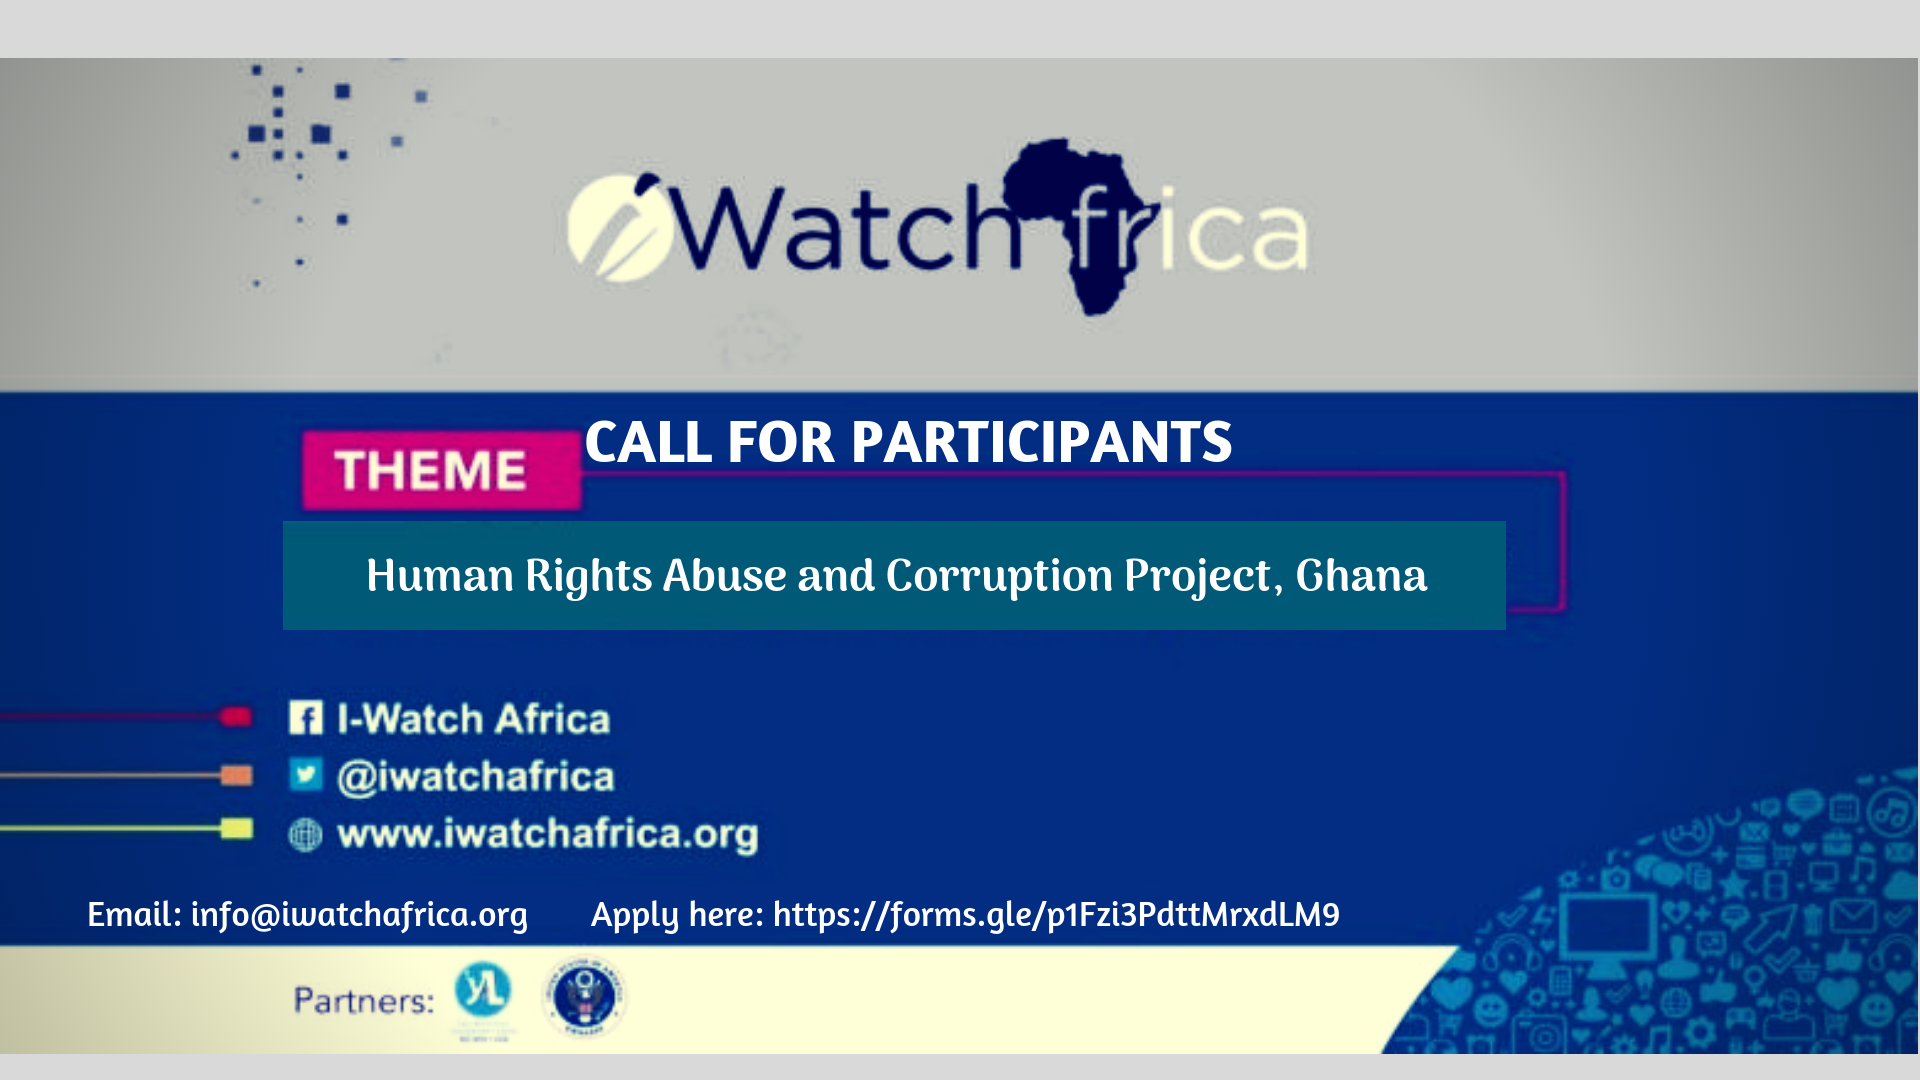 Call for Participants: iWatch Africa Human Rights Abuse & Corruption Project 2019 in Ghana